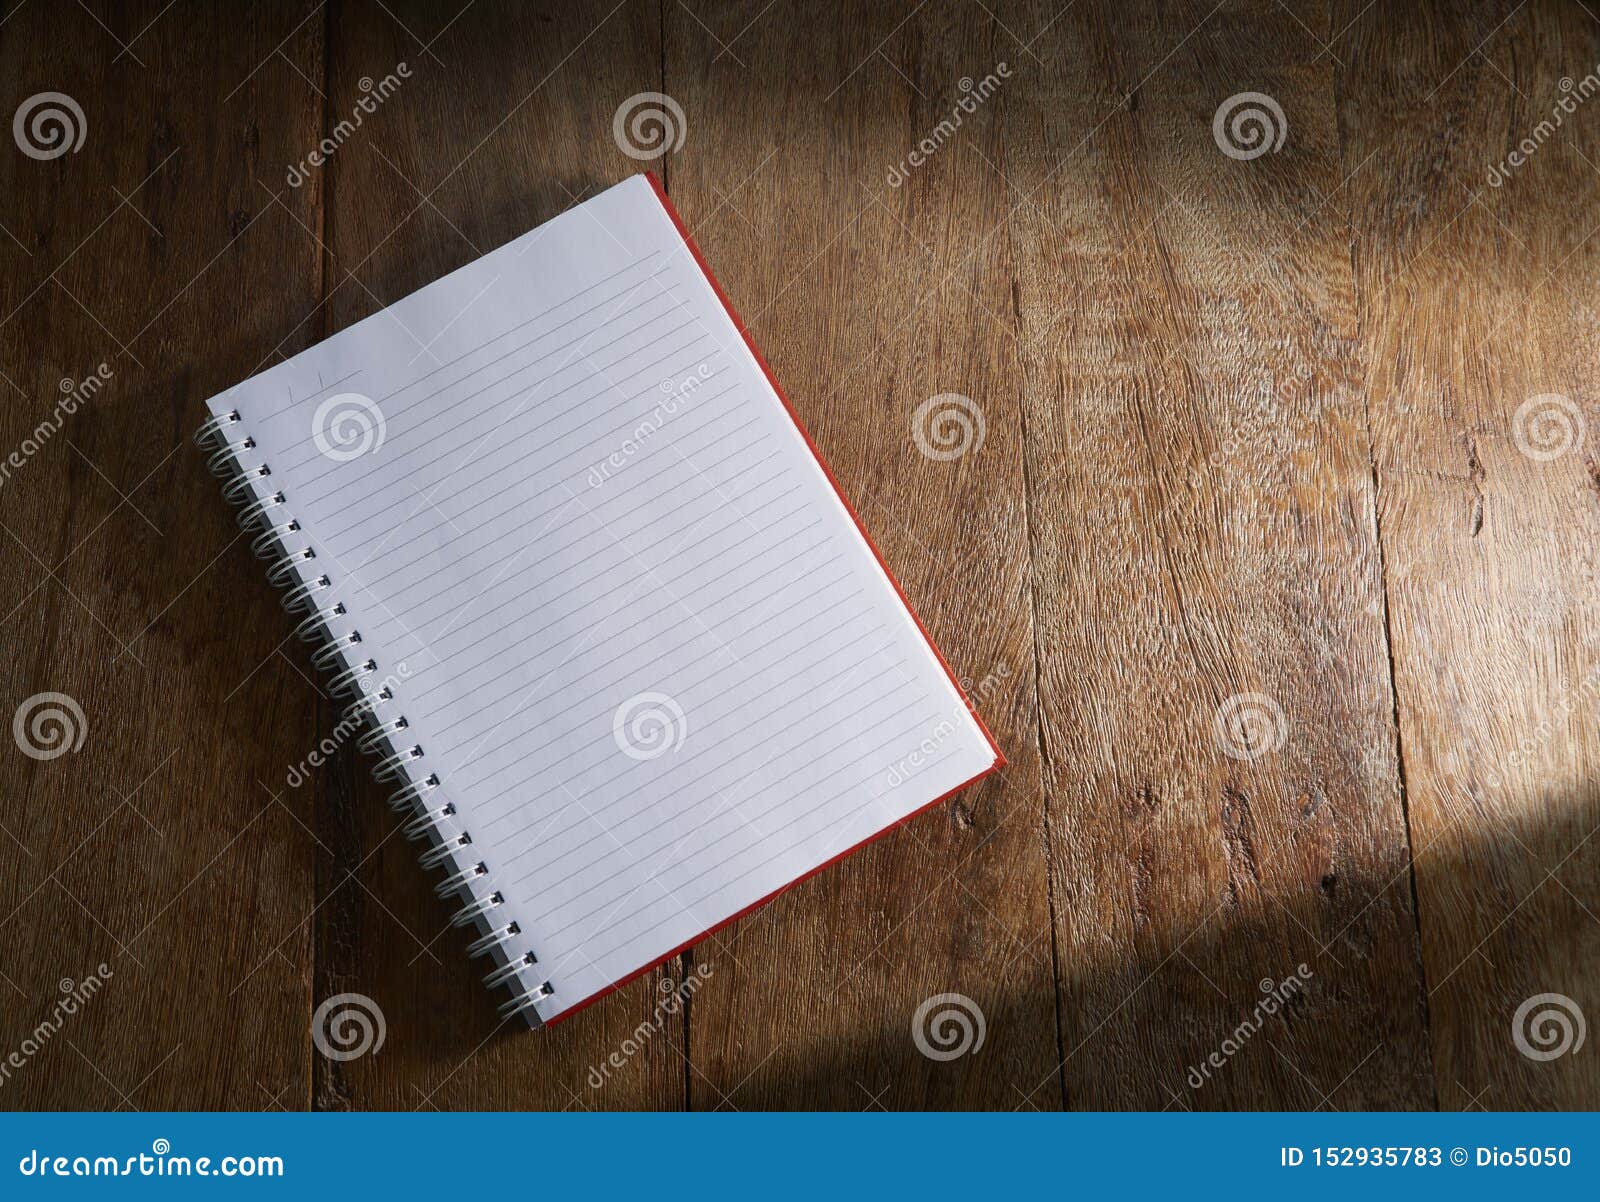 open notebook on wooden background.